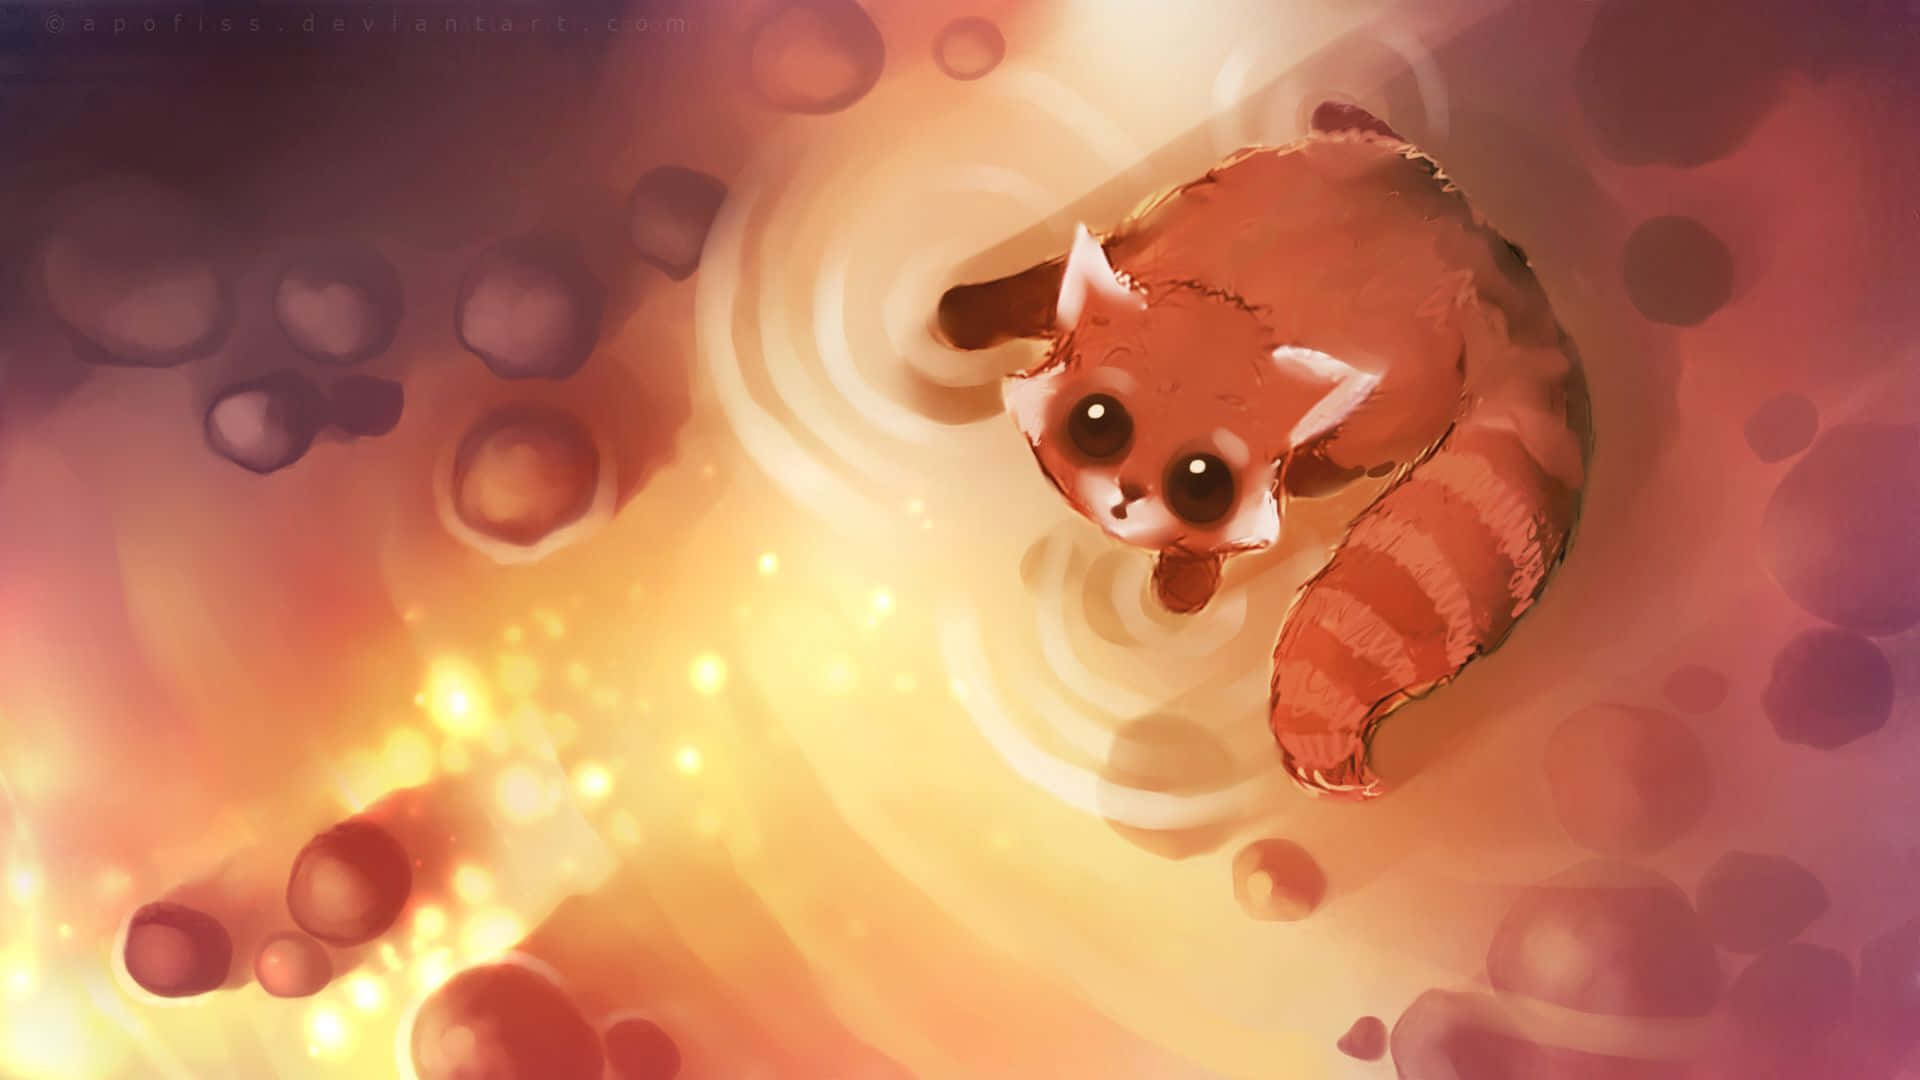 Join the fun with these cute animals enjoying the anime life Wallpaper